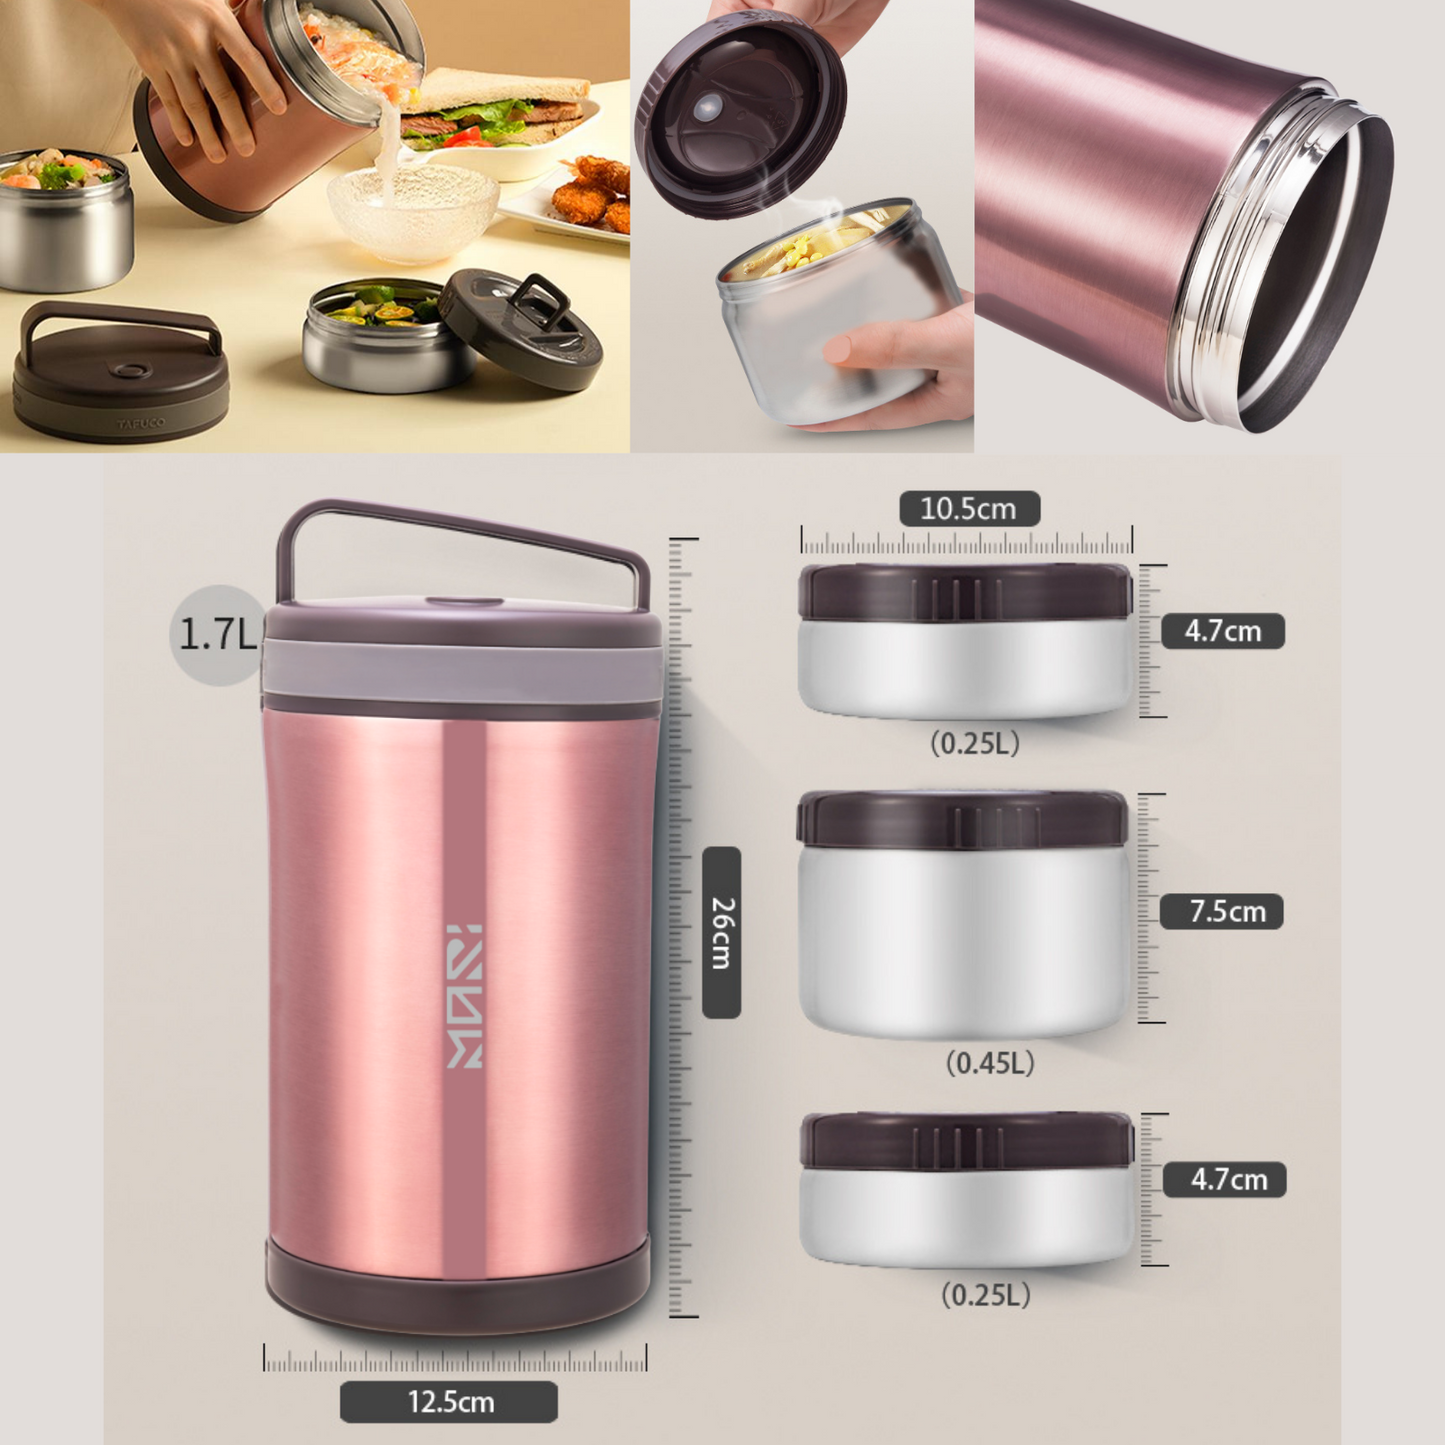 1.7L Soup Jar and 3 Stainless Steel Containers in this Lunch Box